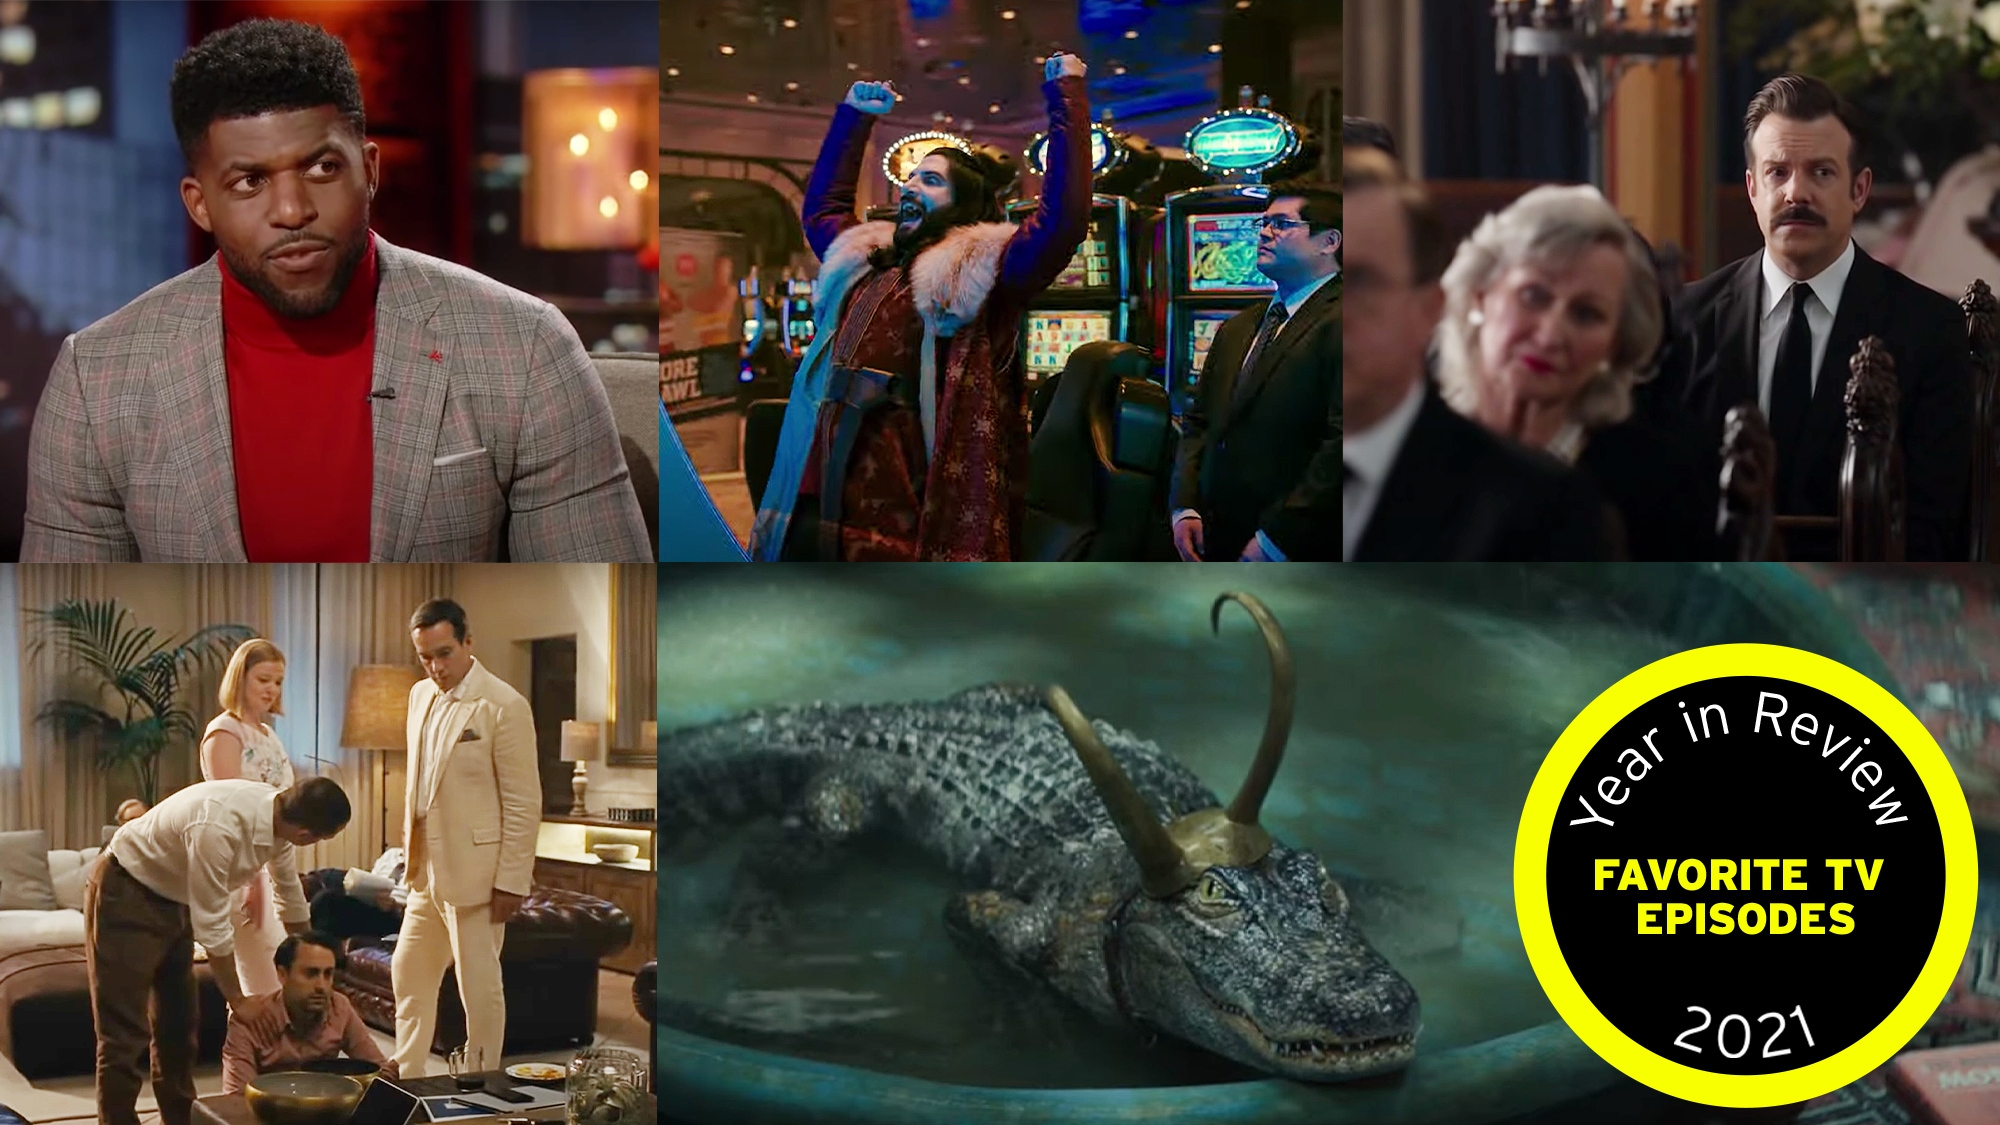 The A.V. Club’s favorite TV episodes of 2021